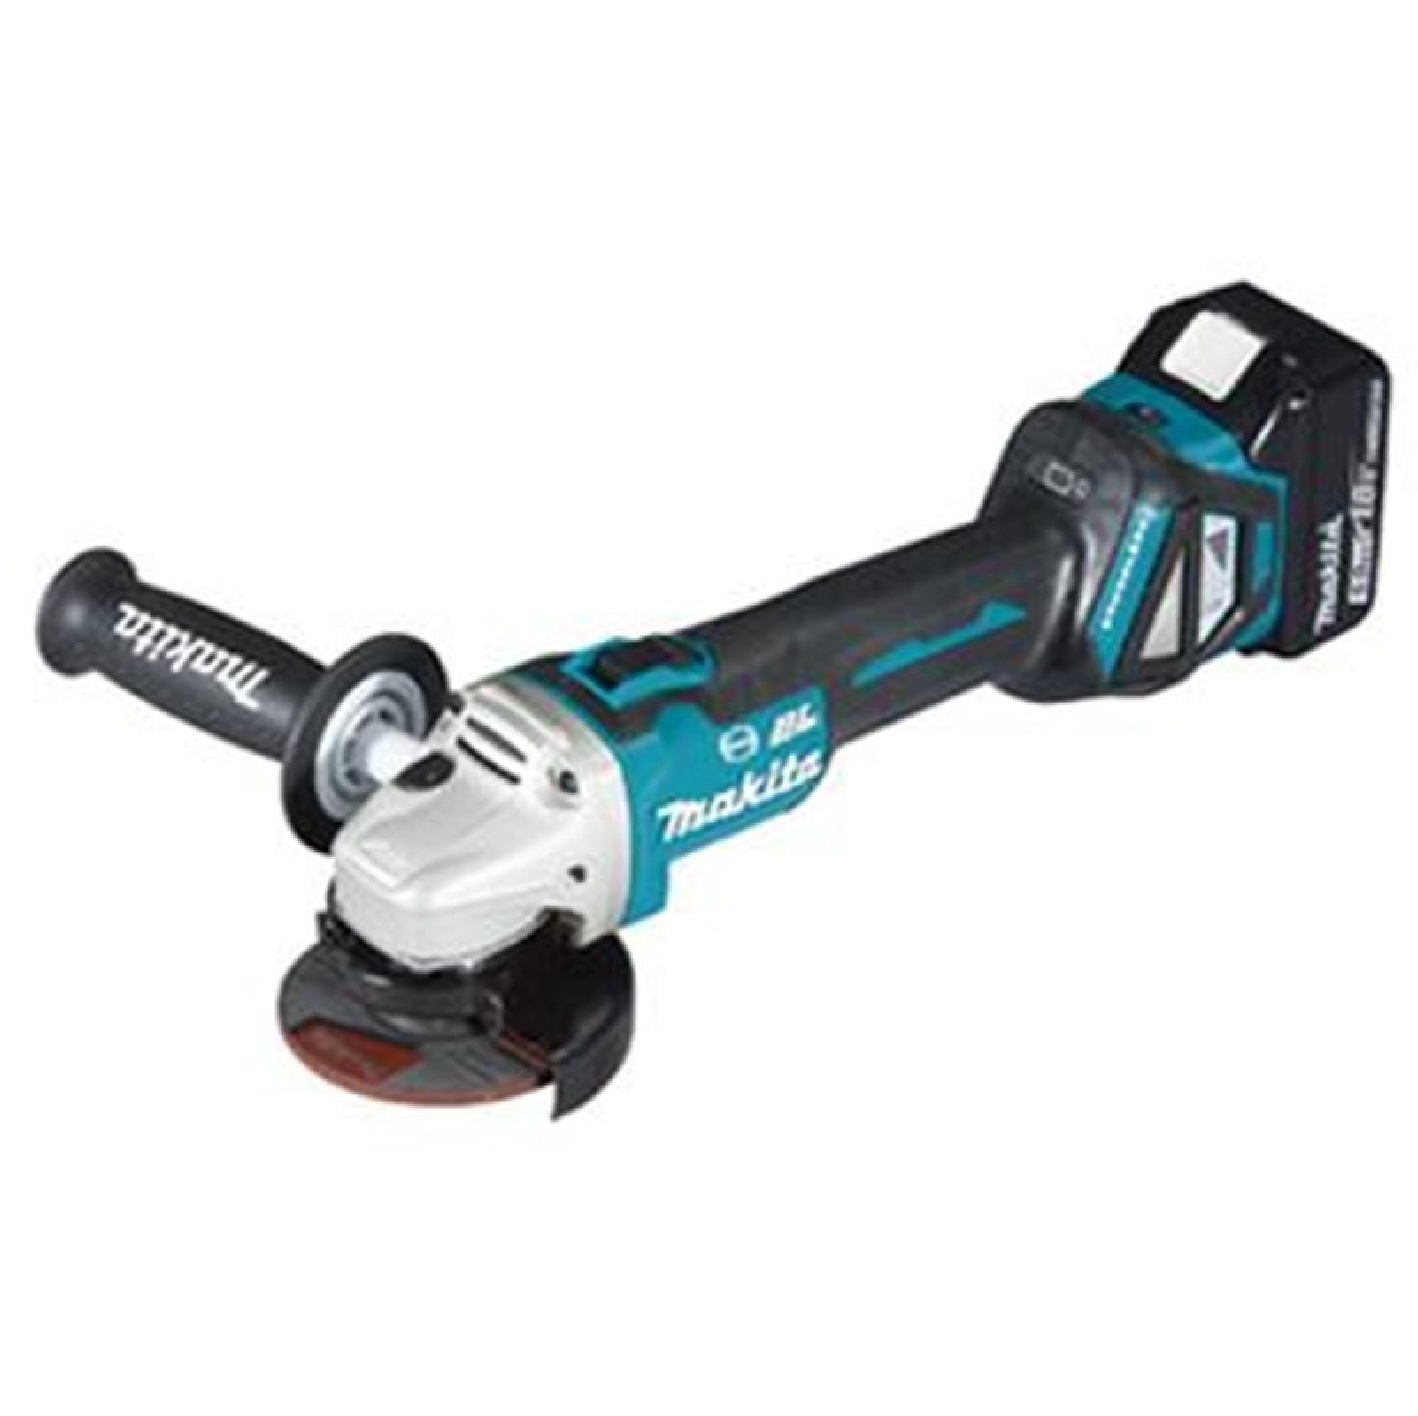 Makita DGA413RTE 2 X 18V 5.0AH LI-ION 100MM (4") Brushless Angle Grinder With Top Slide Switch